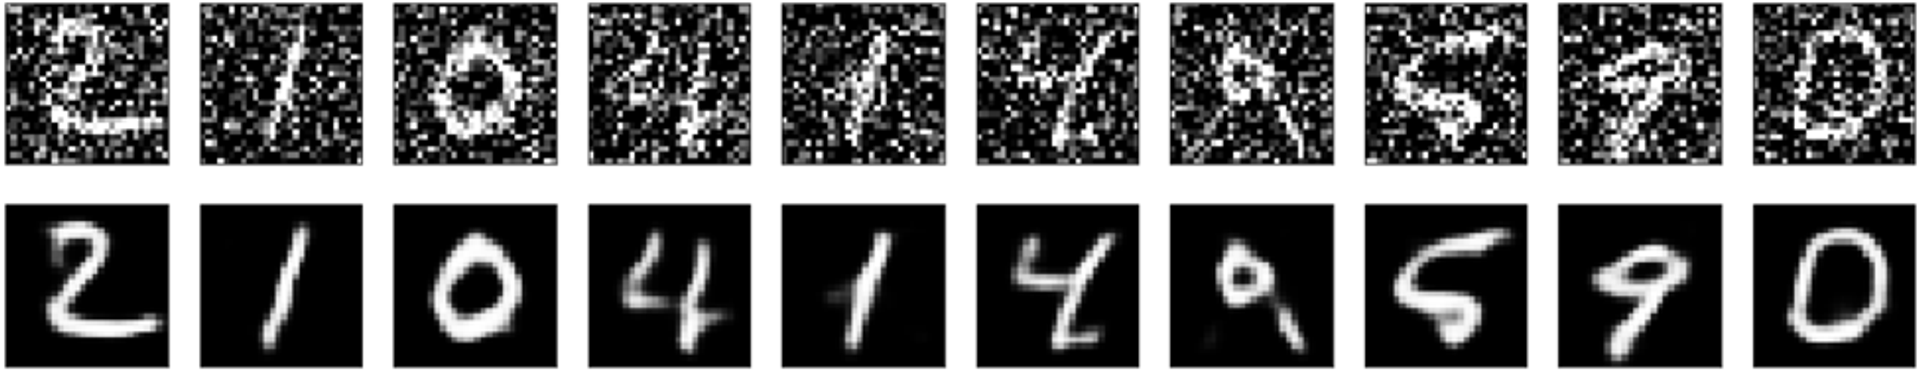 Sample of noisy input data and reconstructed images